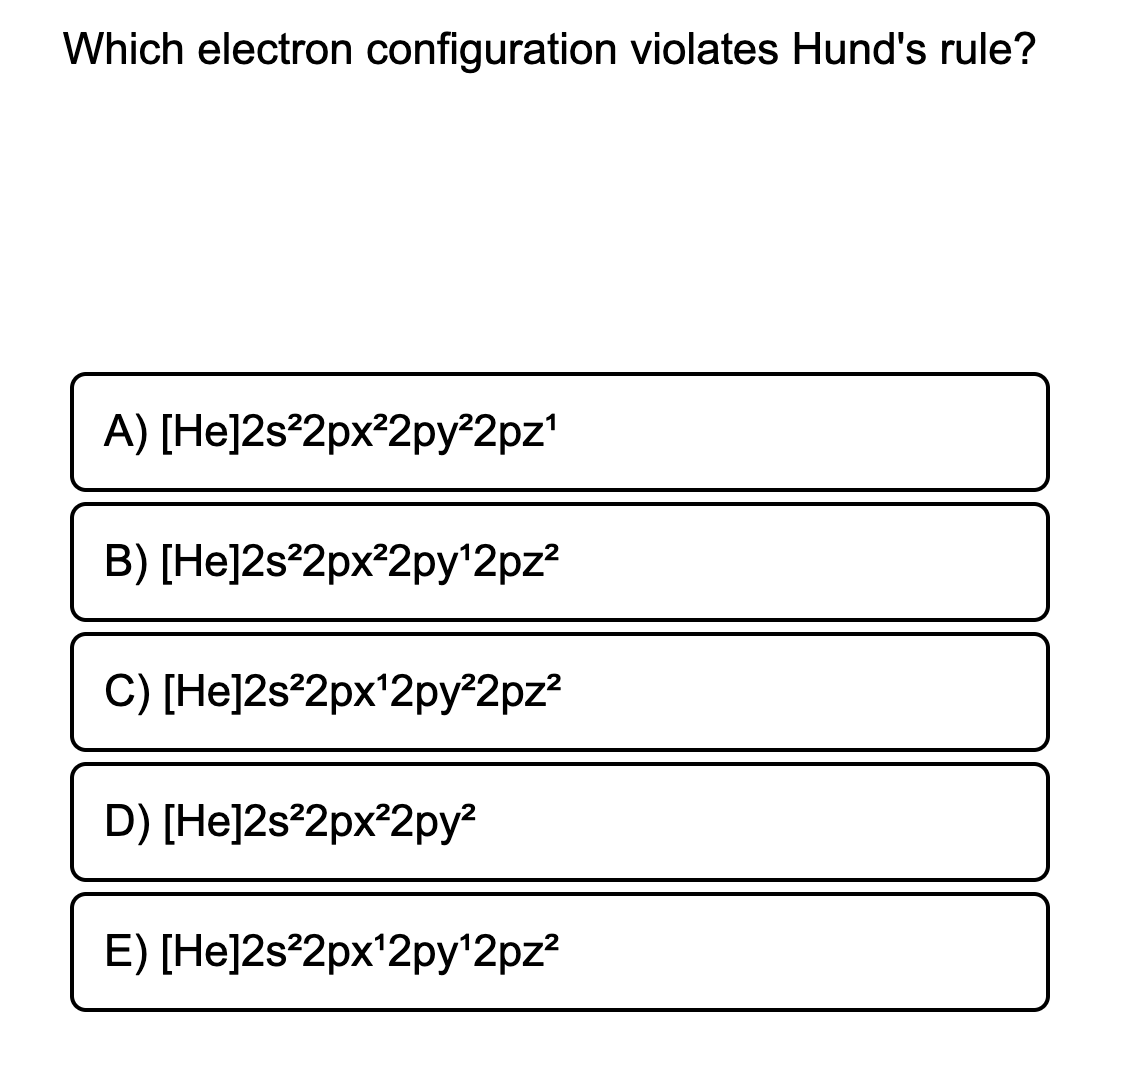 Which electron configuration violates Hund's rule?
A) [He]2s°2px²2py 2pz'
B) [He]2s°2px²2py'2pz?
C) [He]2s²2px'2py®2pz?
D) [He]2s²2px²2py?
E) [He]2s°2px'2py'2pz?
